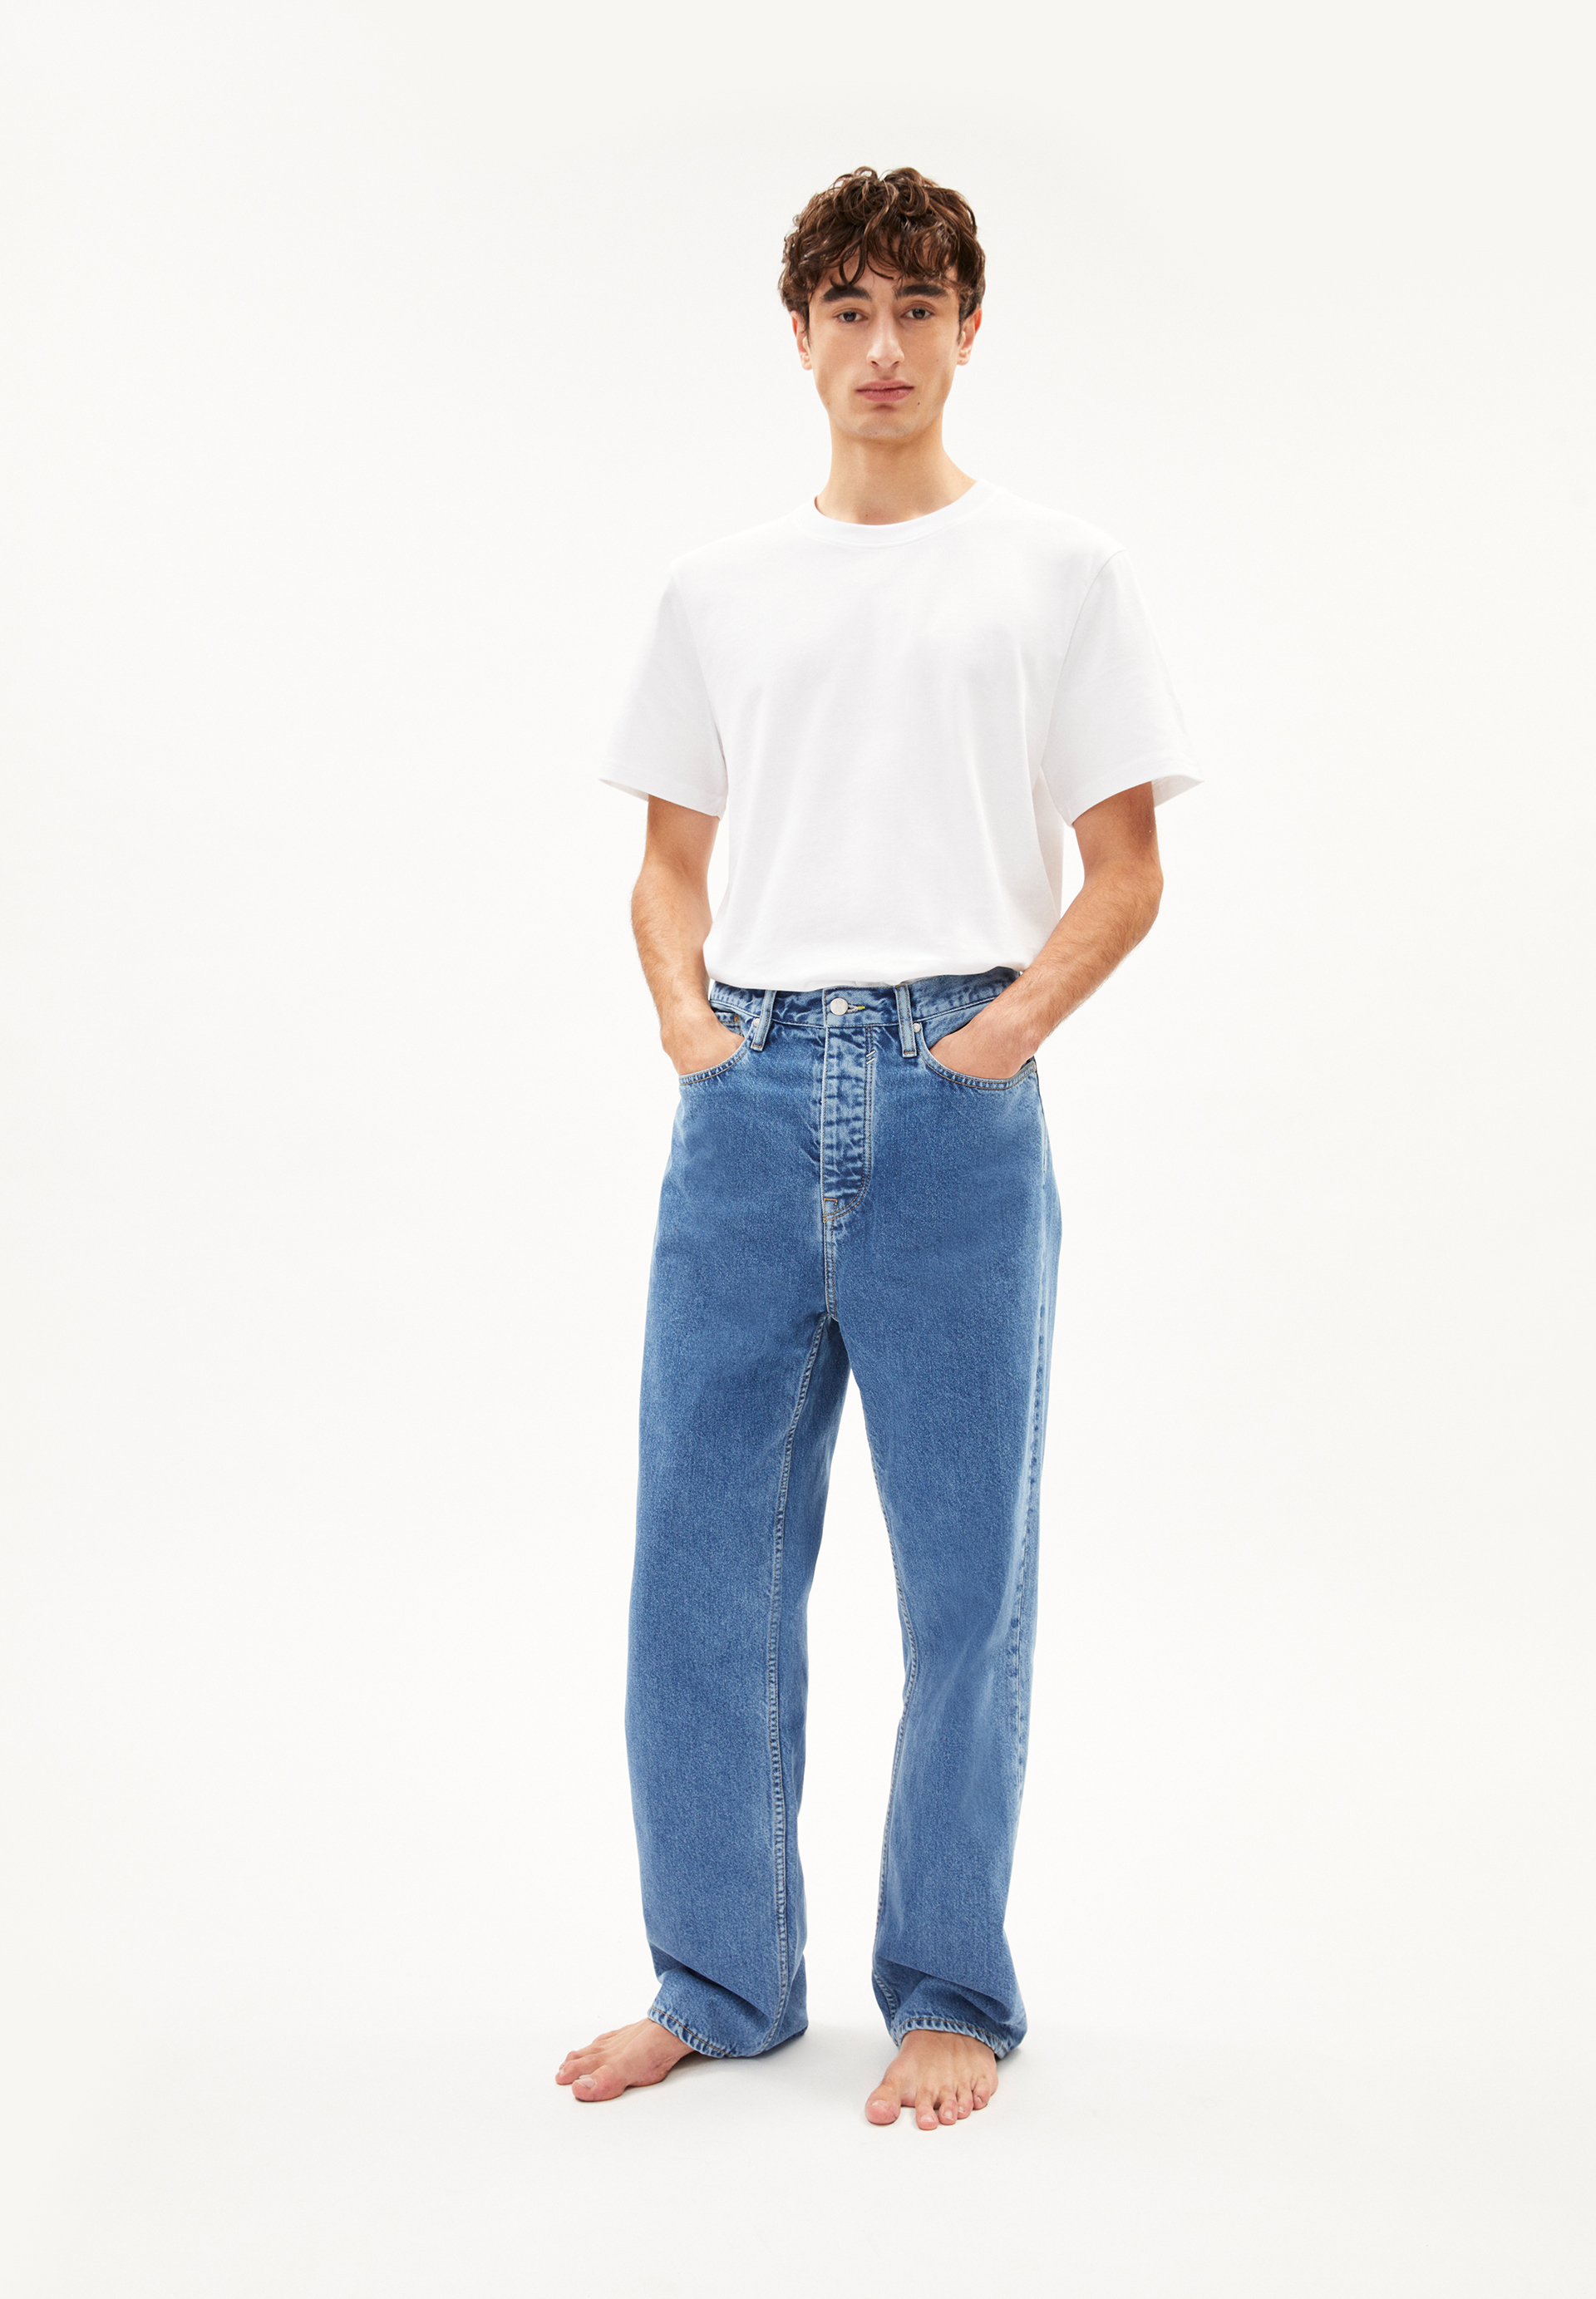 TAATO Relaxed Fit Denim made of recycled Cotton